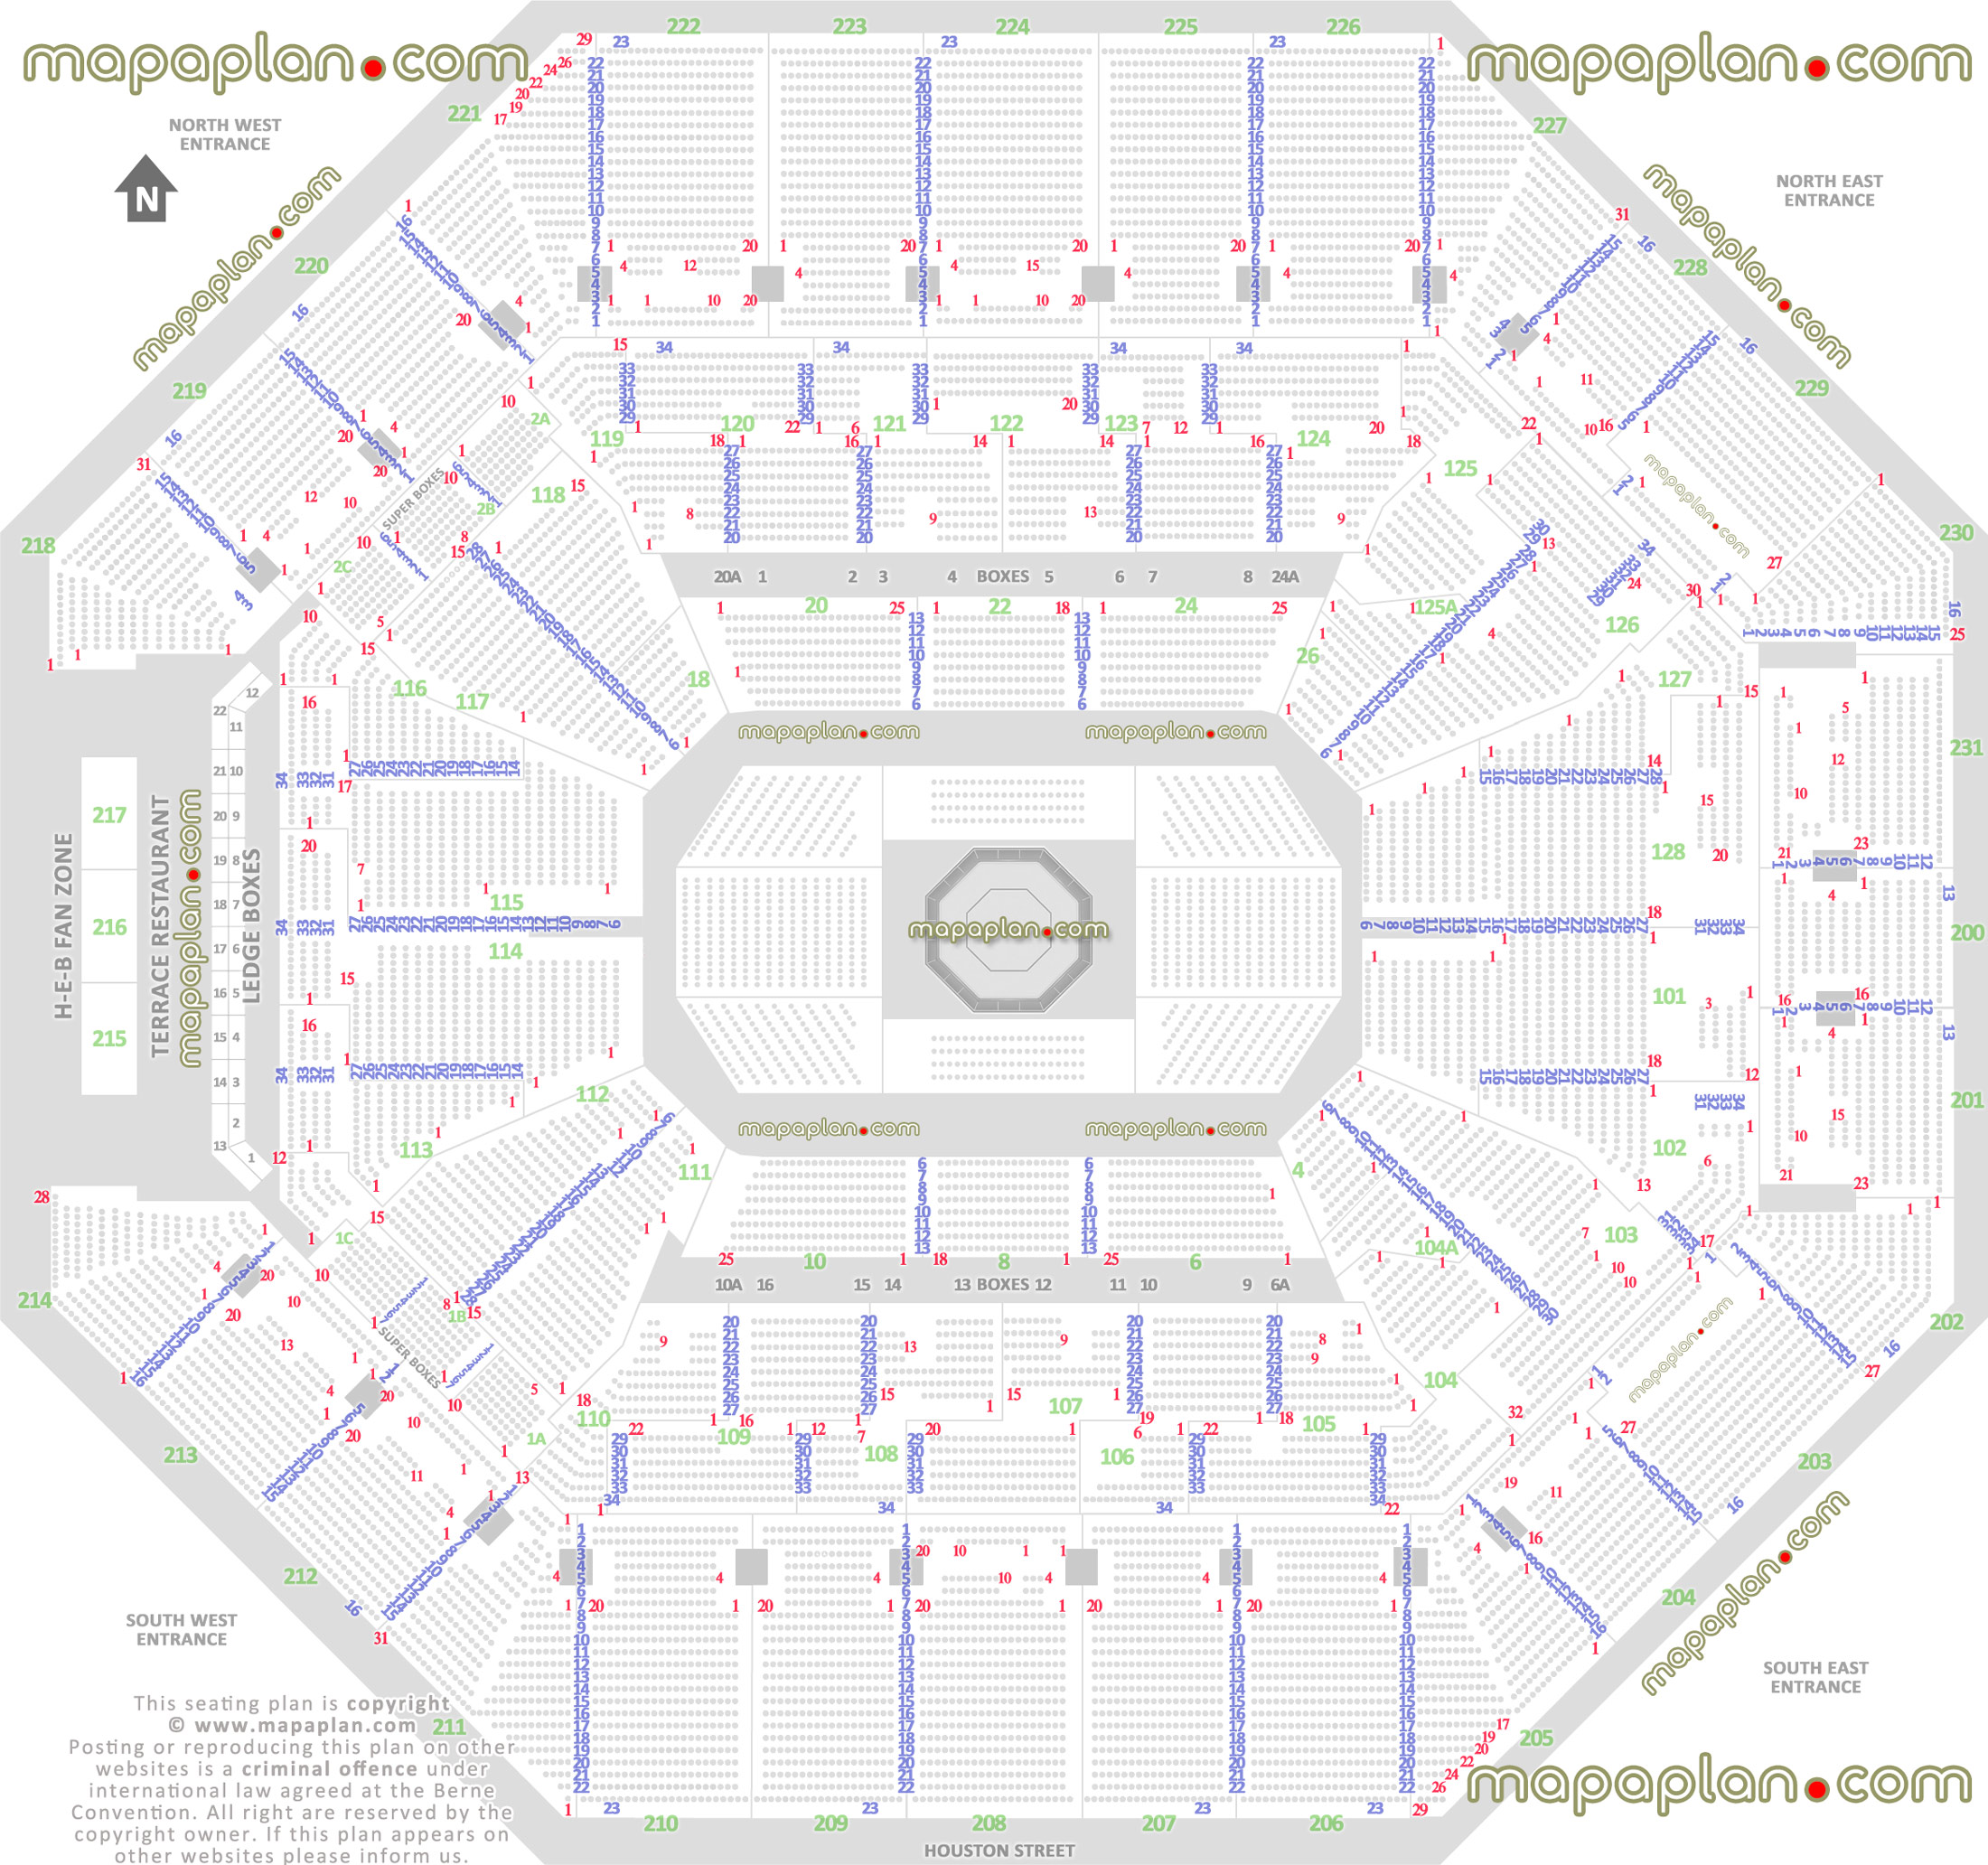 ufc mma fights san antonio tx united states detailed seating capacity arrangement arena row numbers layout west east south north entrance San Antonio AT&T Center seating chart